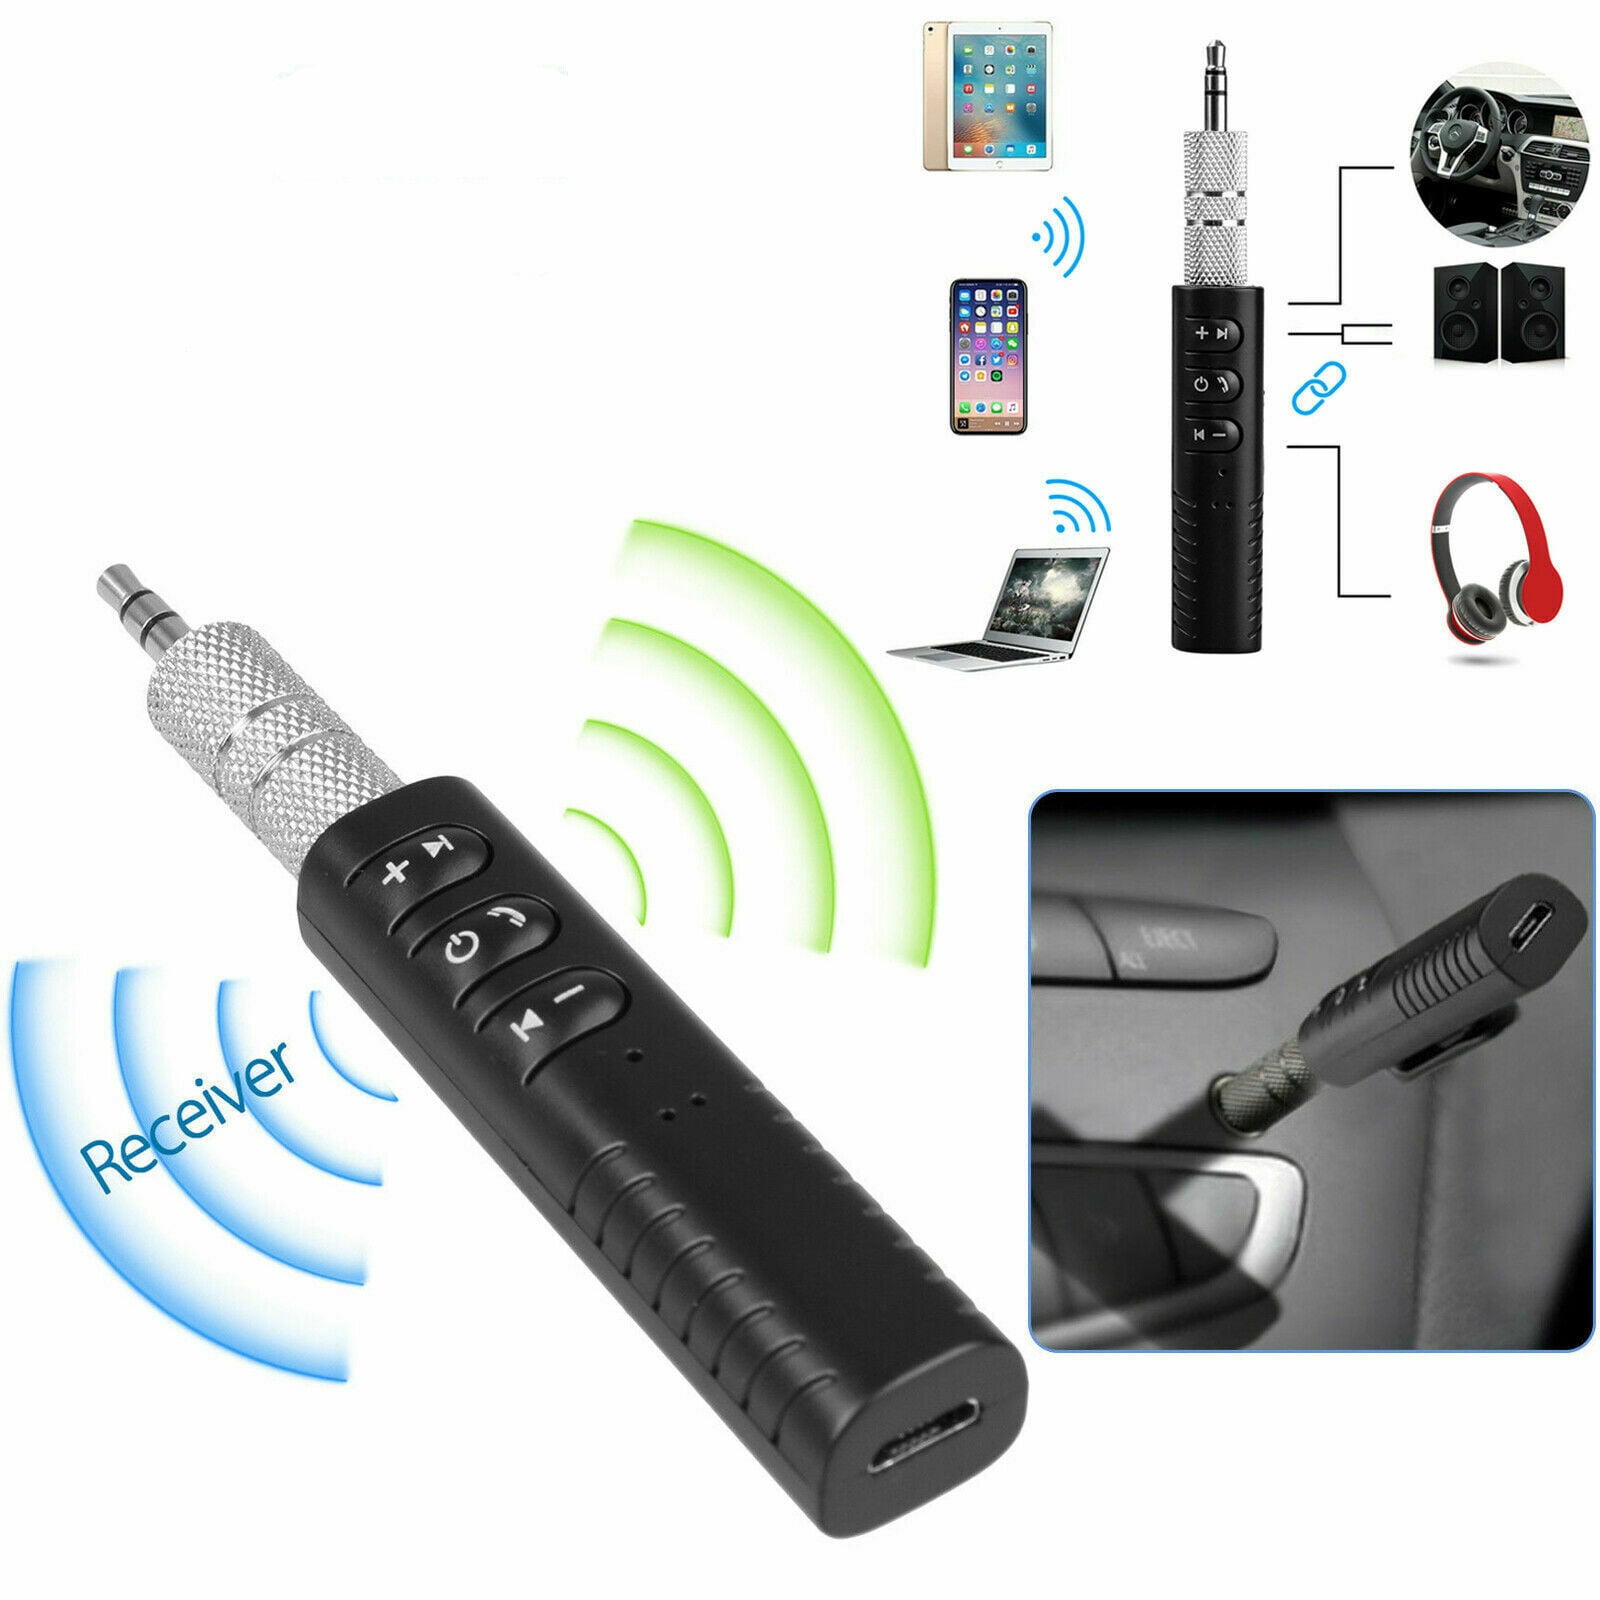 Bluetooth Adapter Receiver,Portable Hands-Free Bluetooth 5.0 Audio Car Kits & Mini 3.5mm AUX Wireless Audio Adapte -